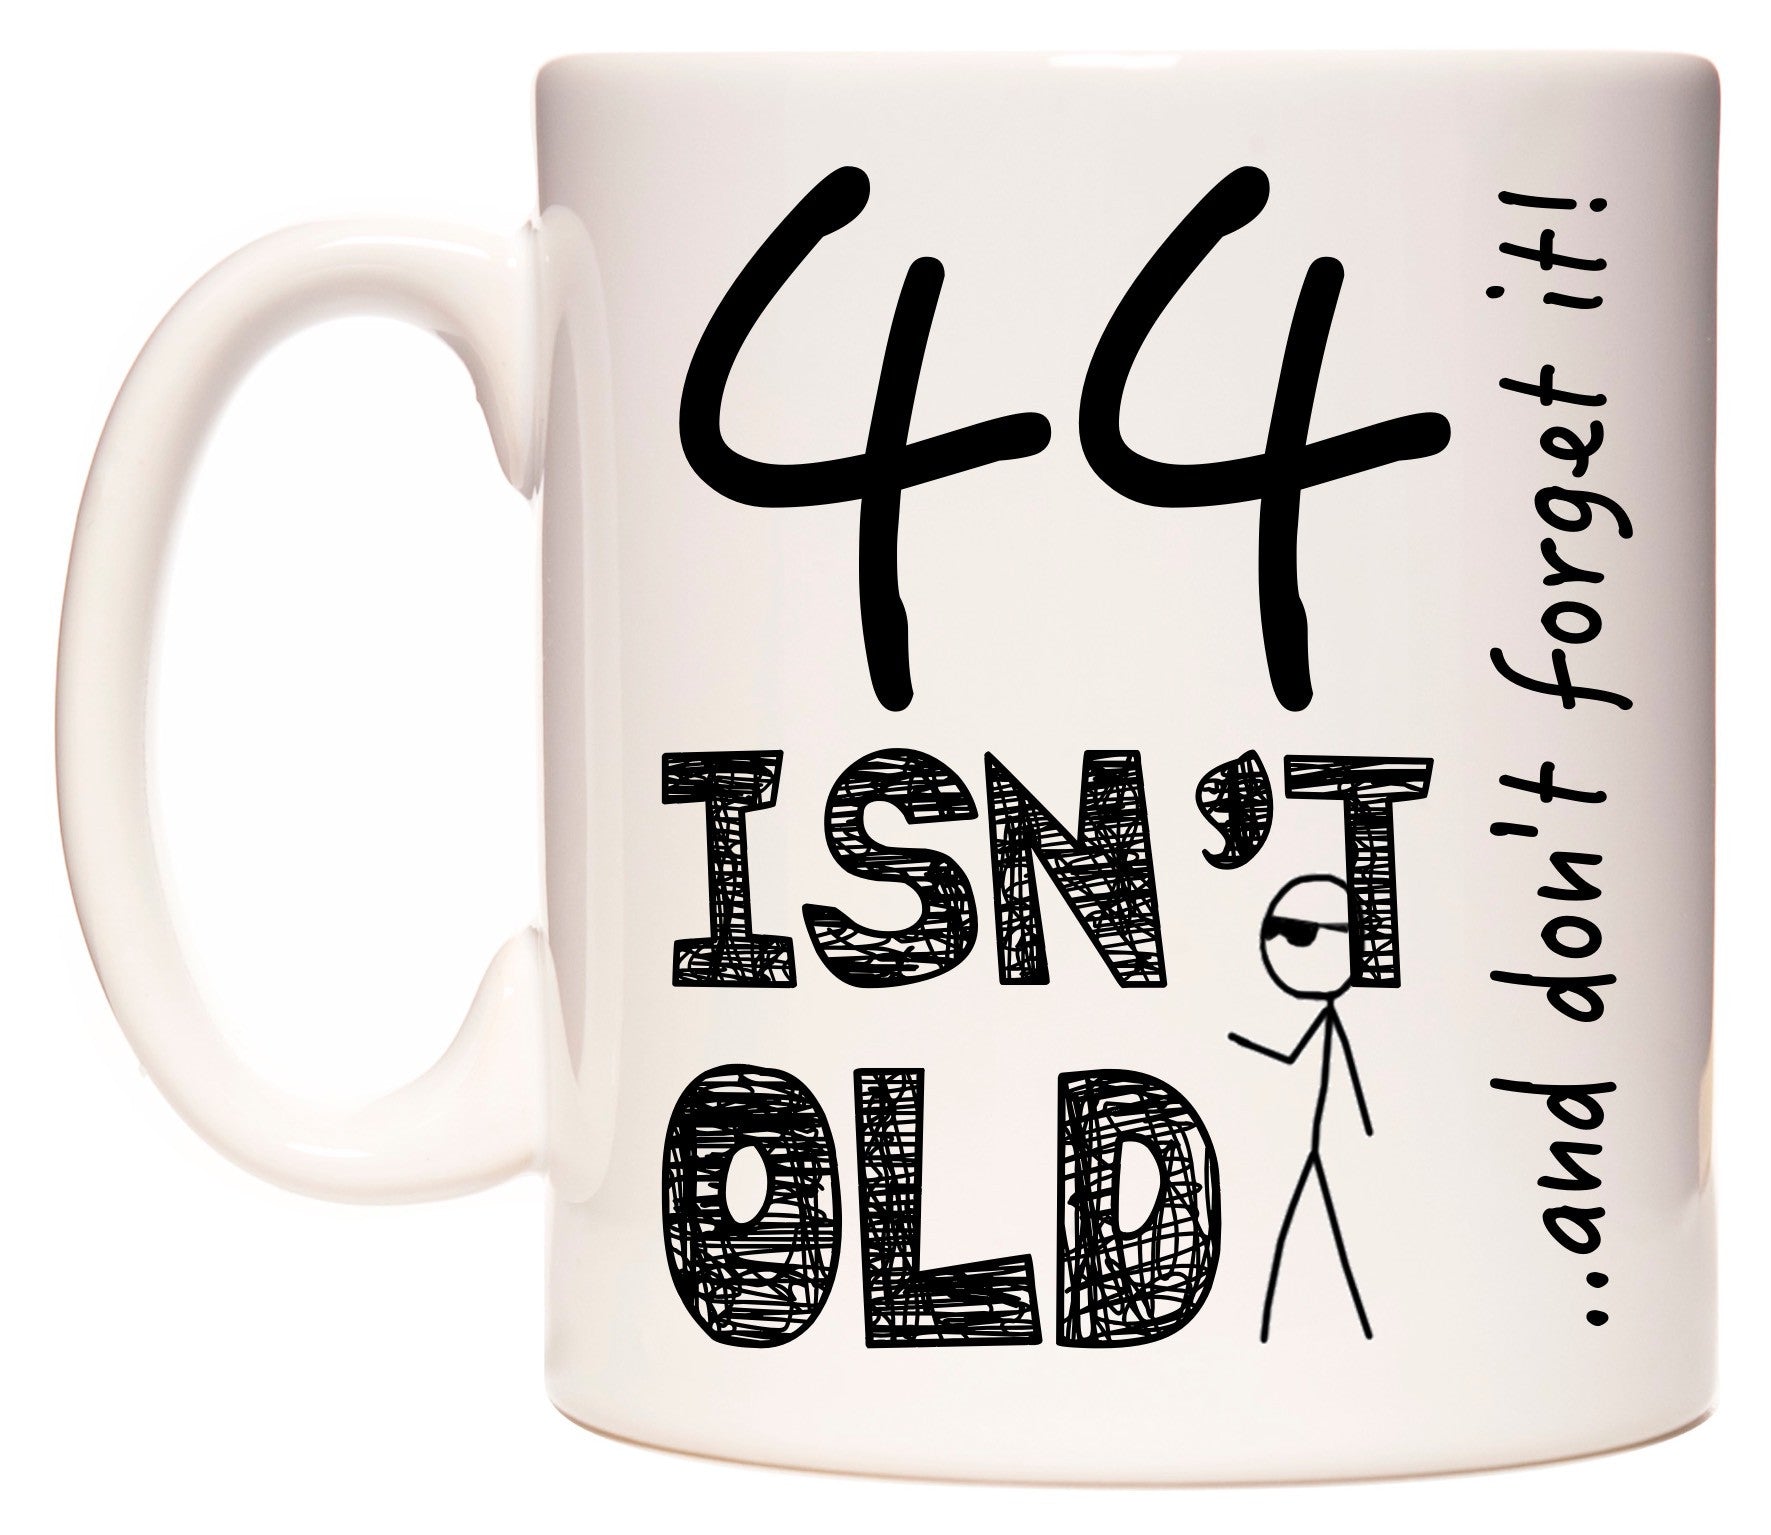 This mug features 44 Isn't Old